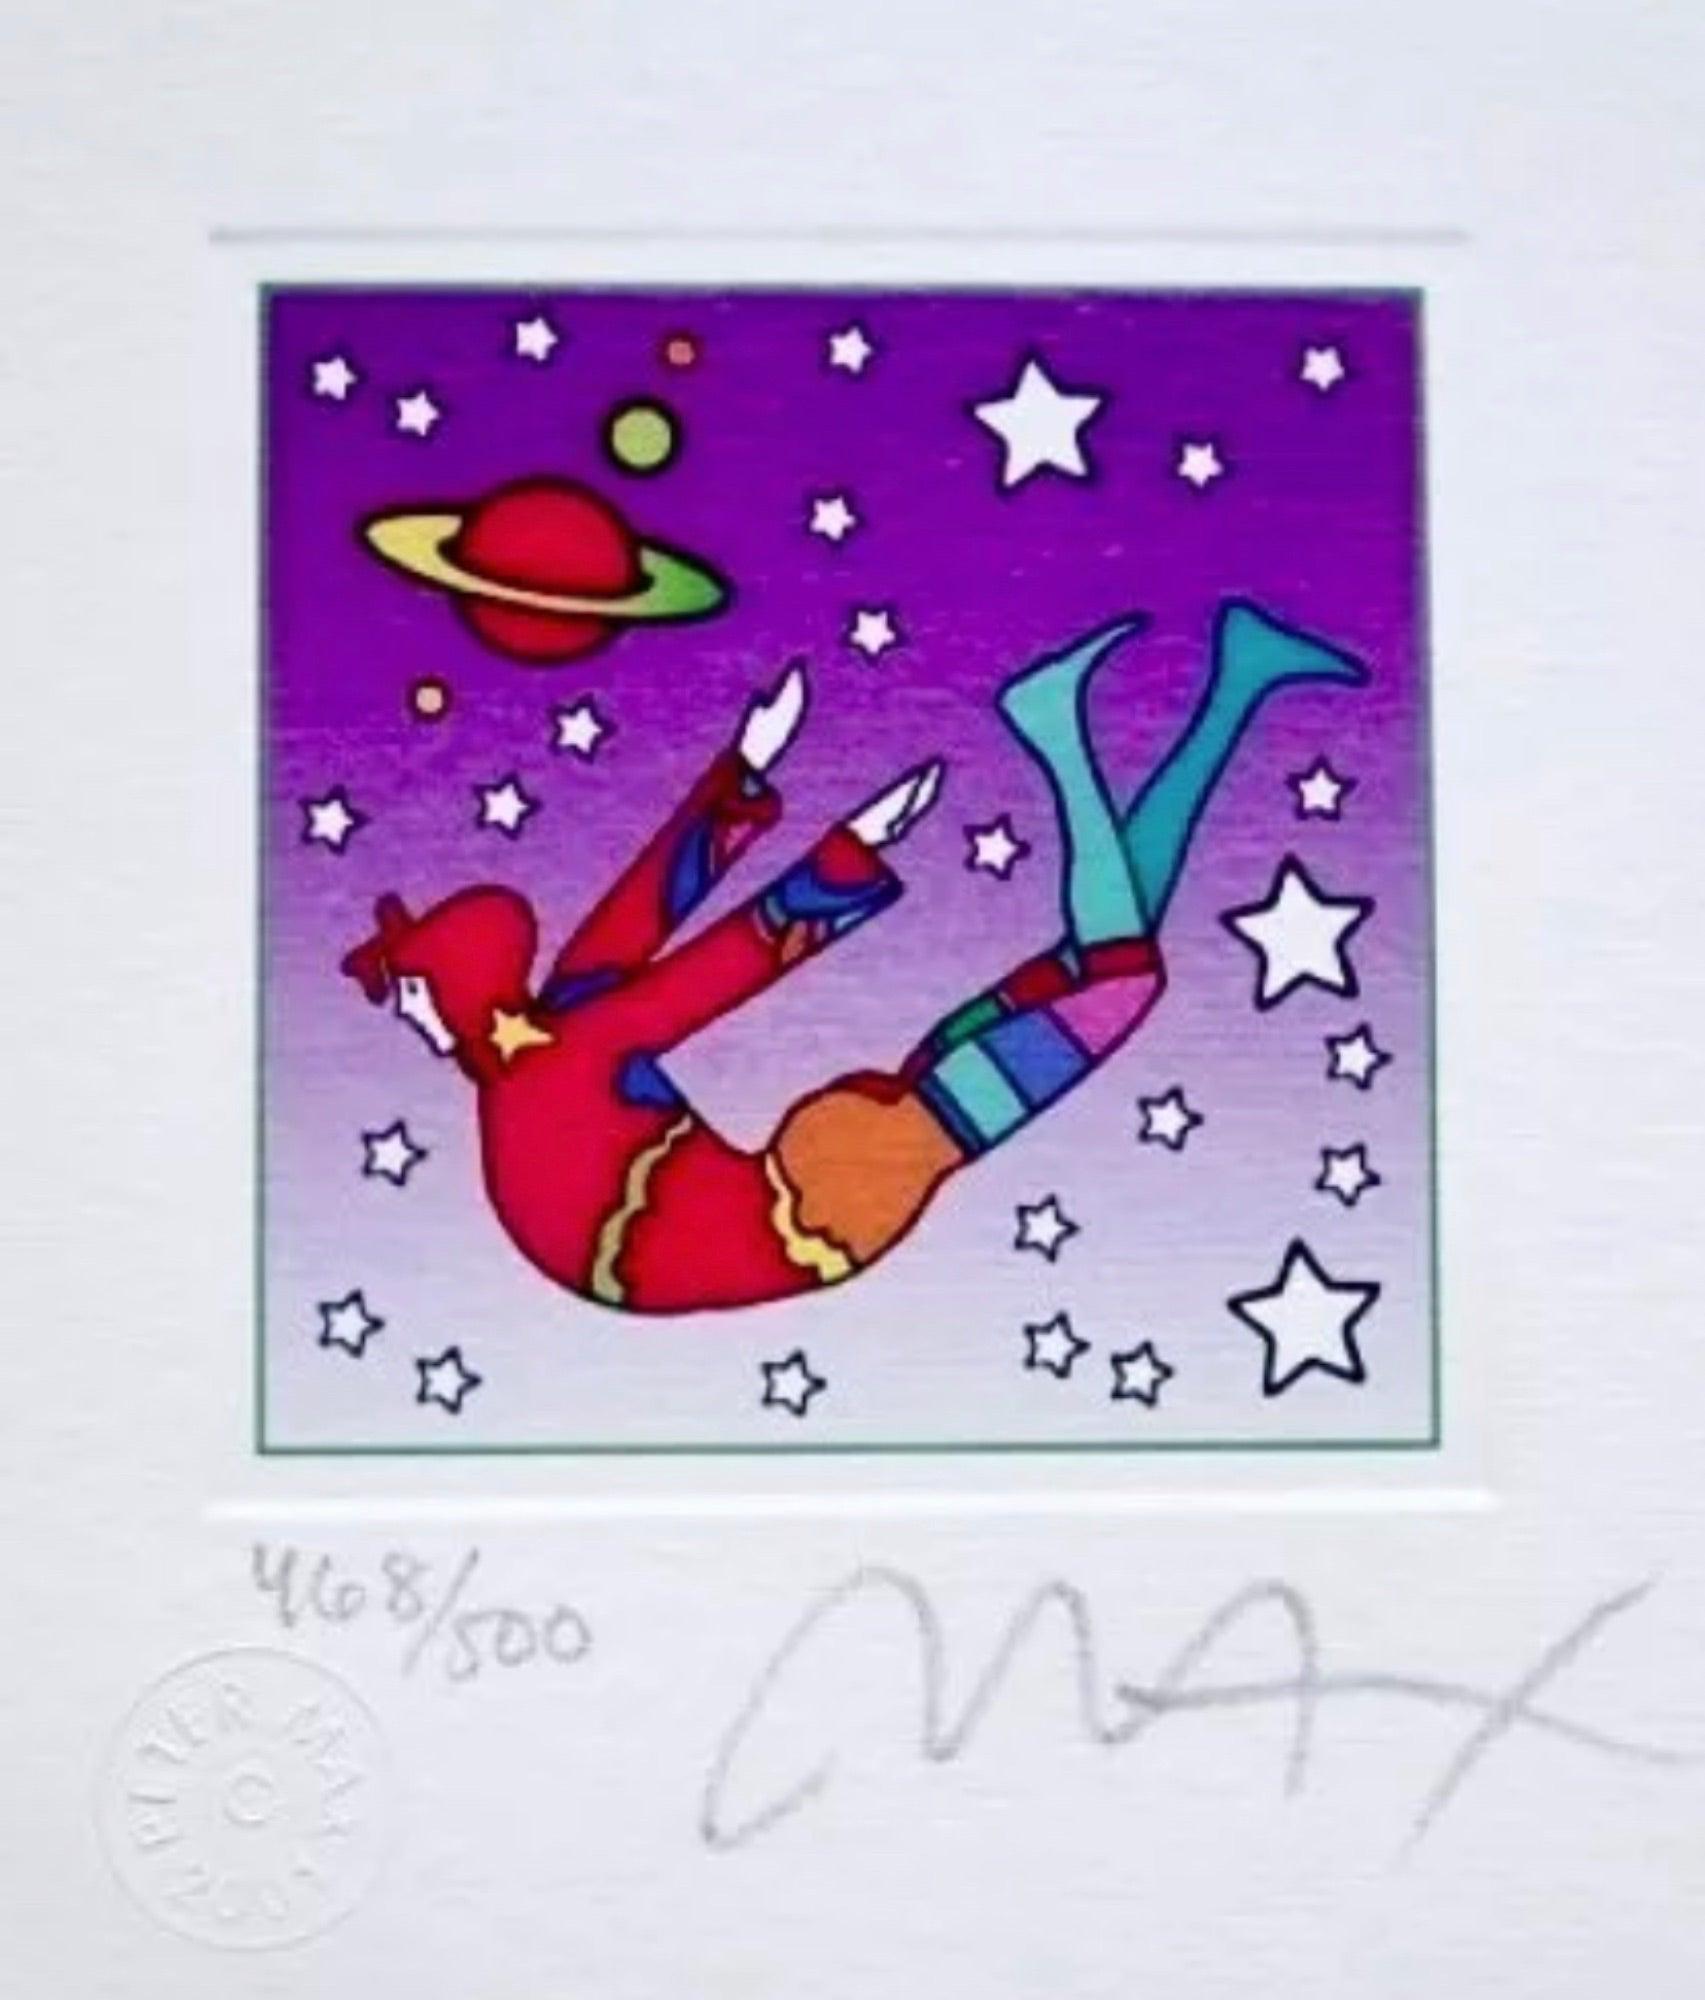 Star Catcher; Cosmic Flier in Space; Cosmic Jumper Detail III; Sage on Mountain - Print by Peter Max